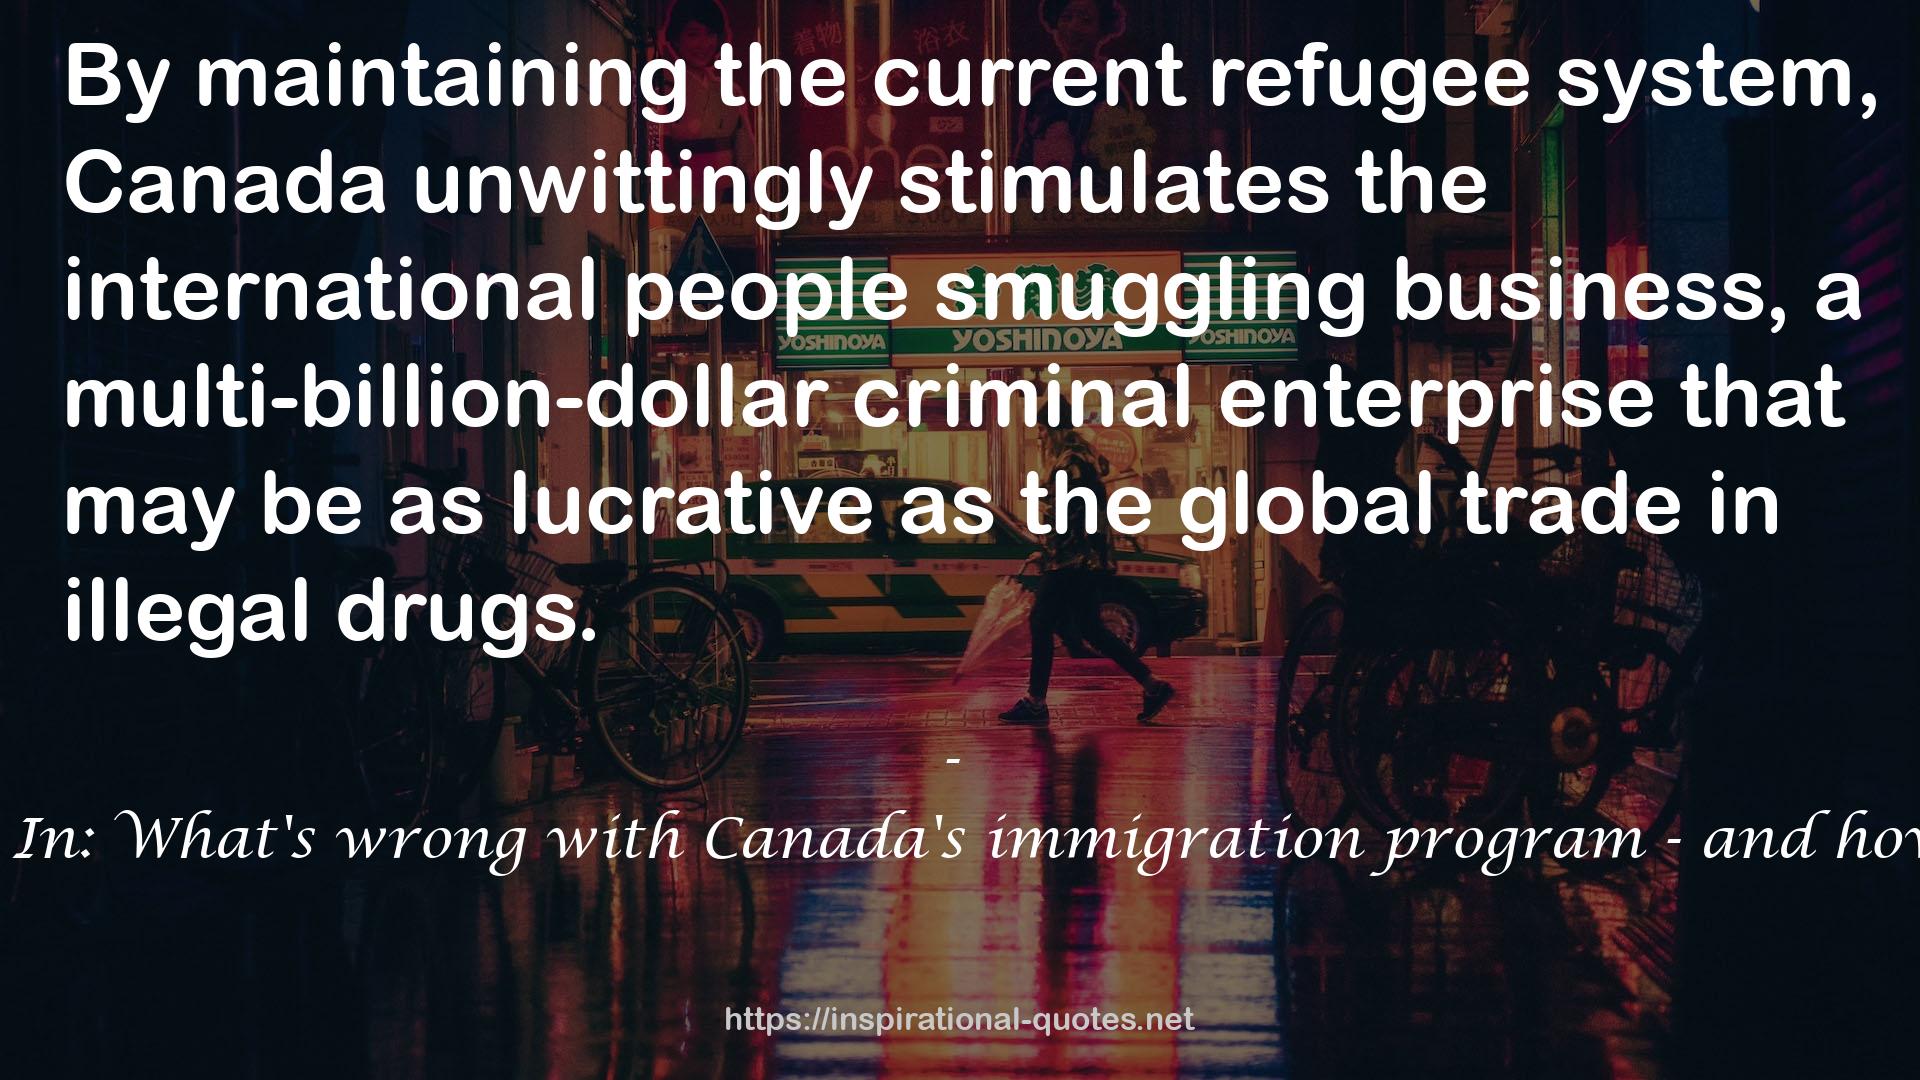 Who Gets In: What's wrong with Canada's immigration program - and how to fix it QUOTES